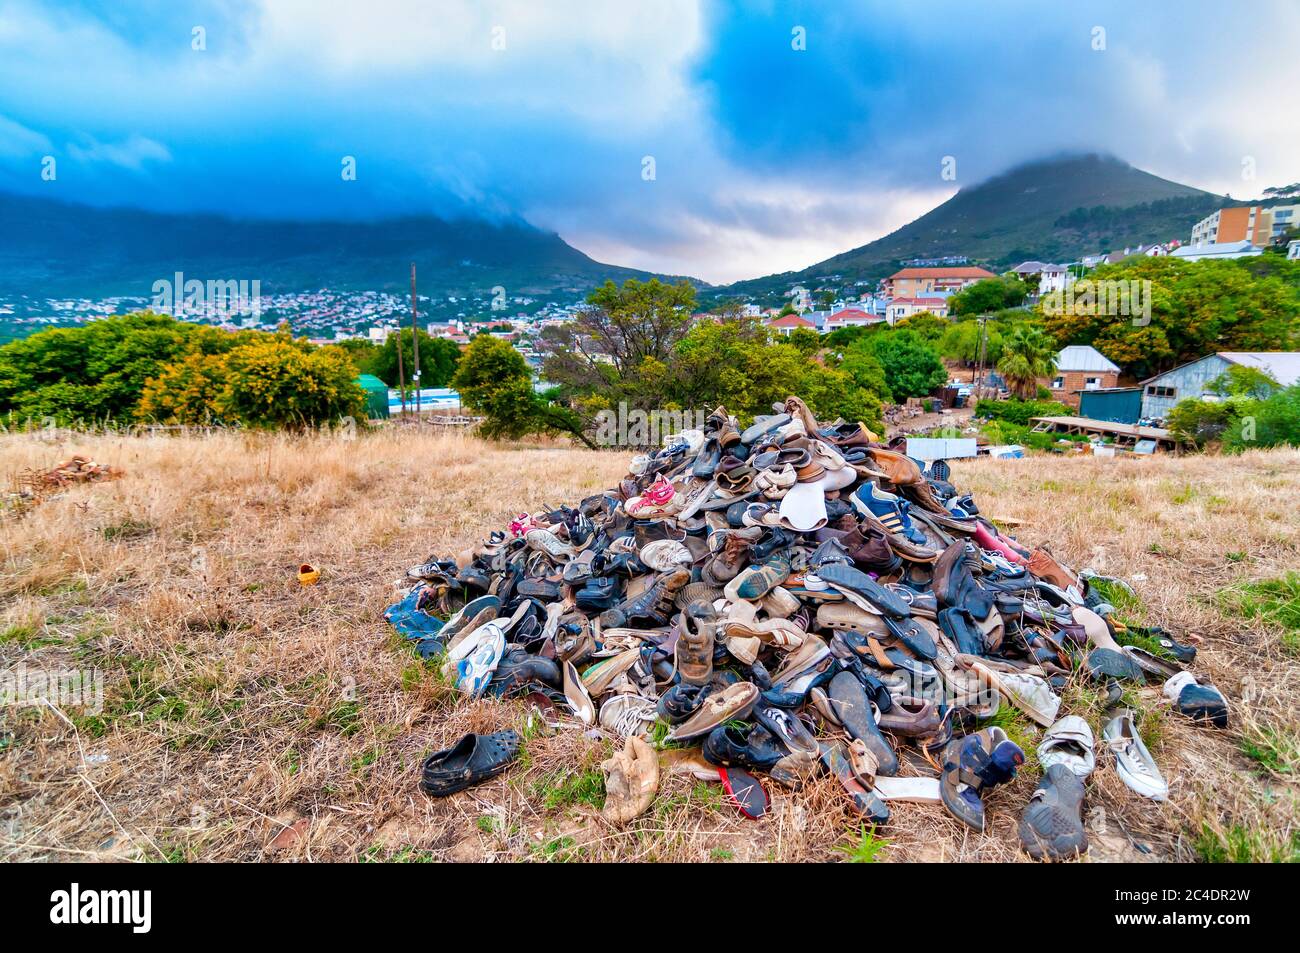 Pile of discarded shoes near Schotsche Kloof, Cape Town, South Africa Stock Photo